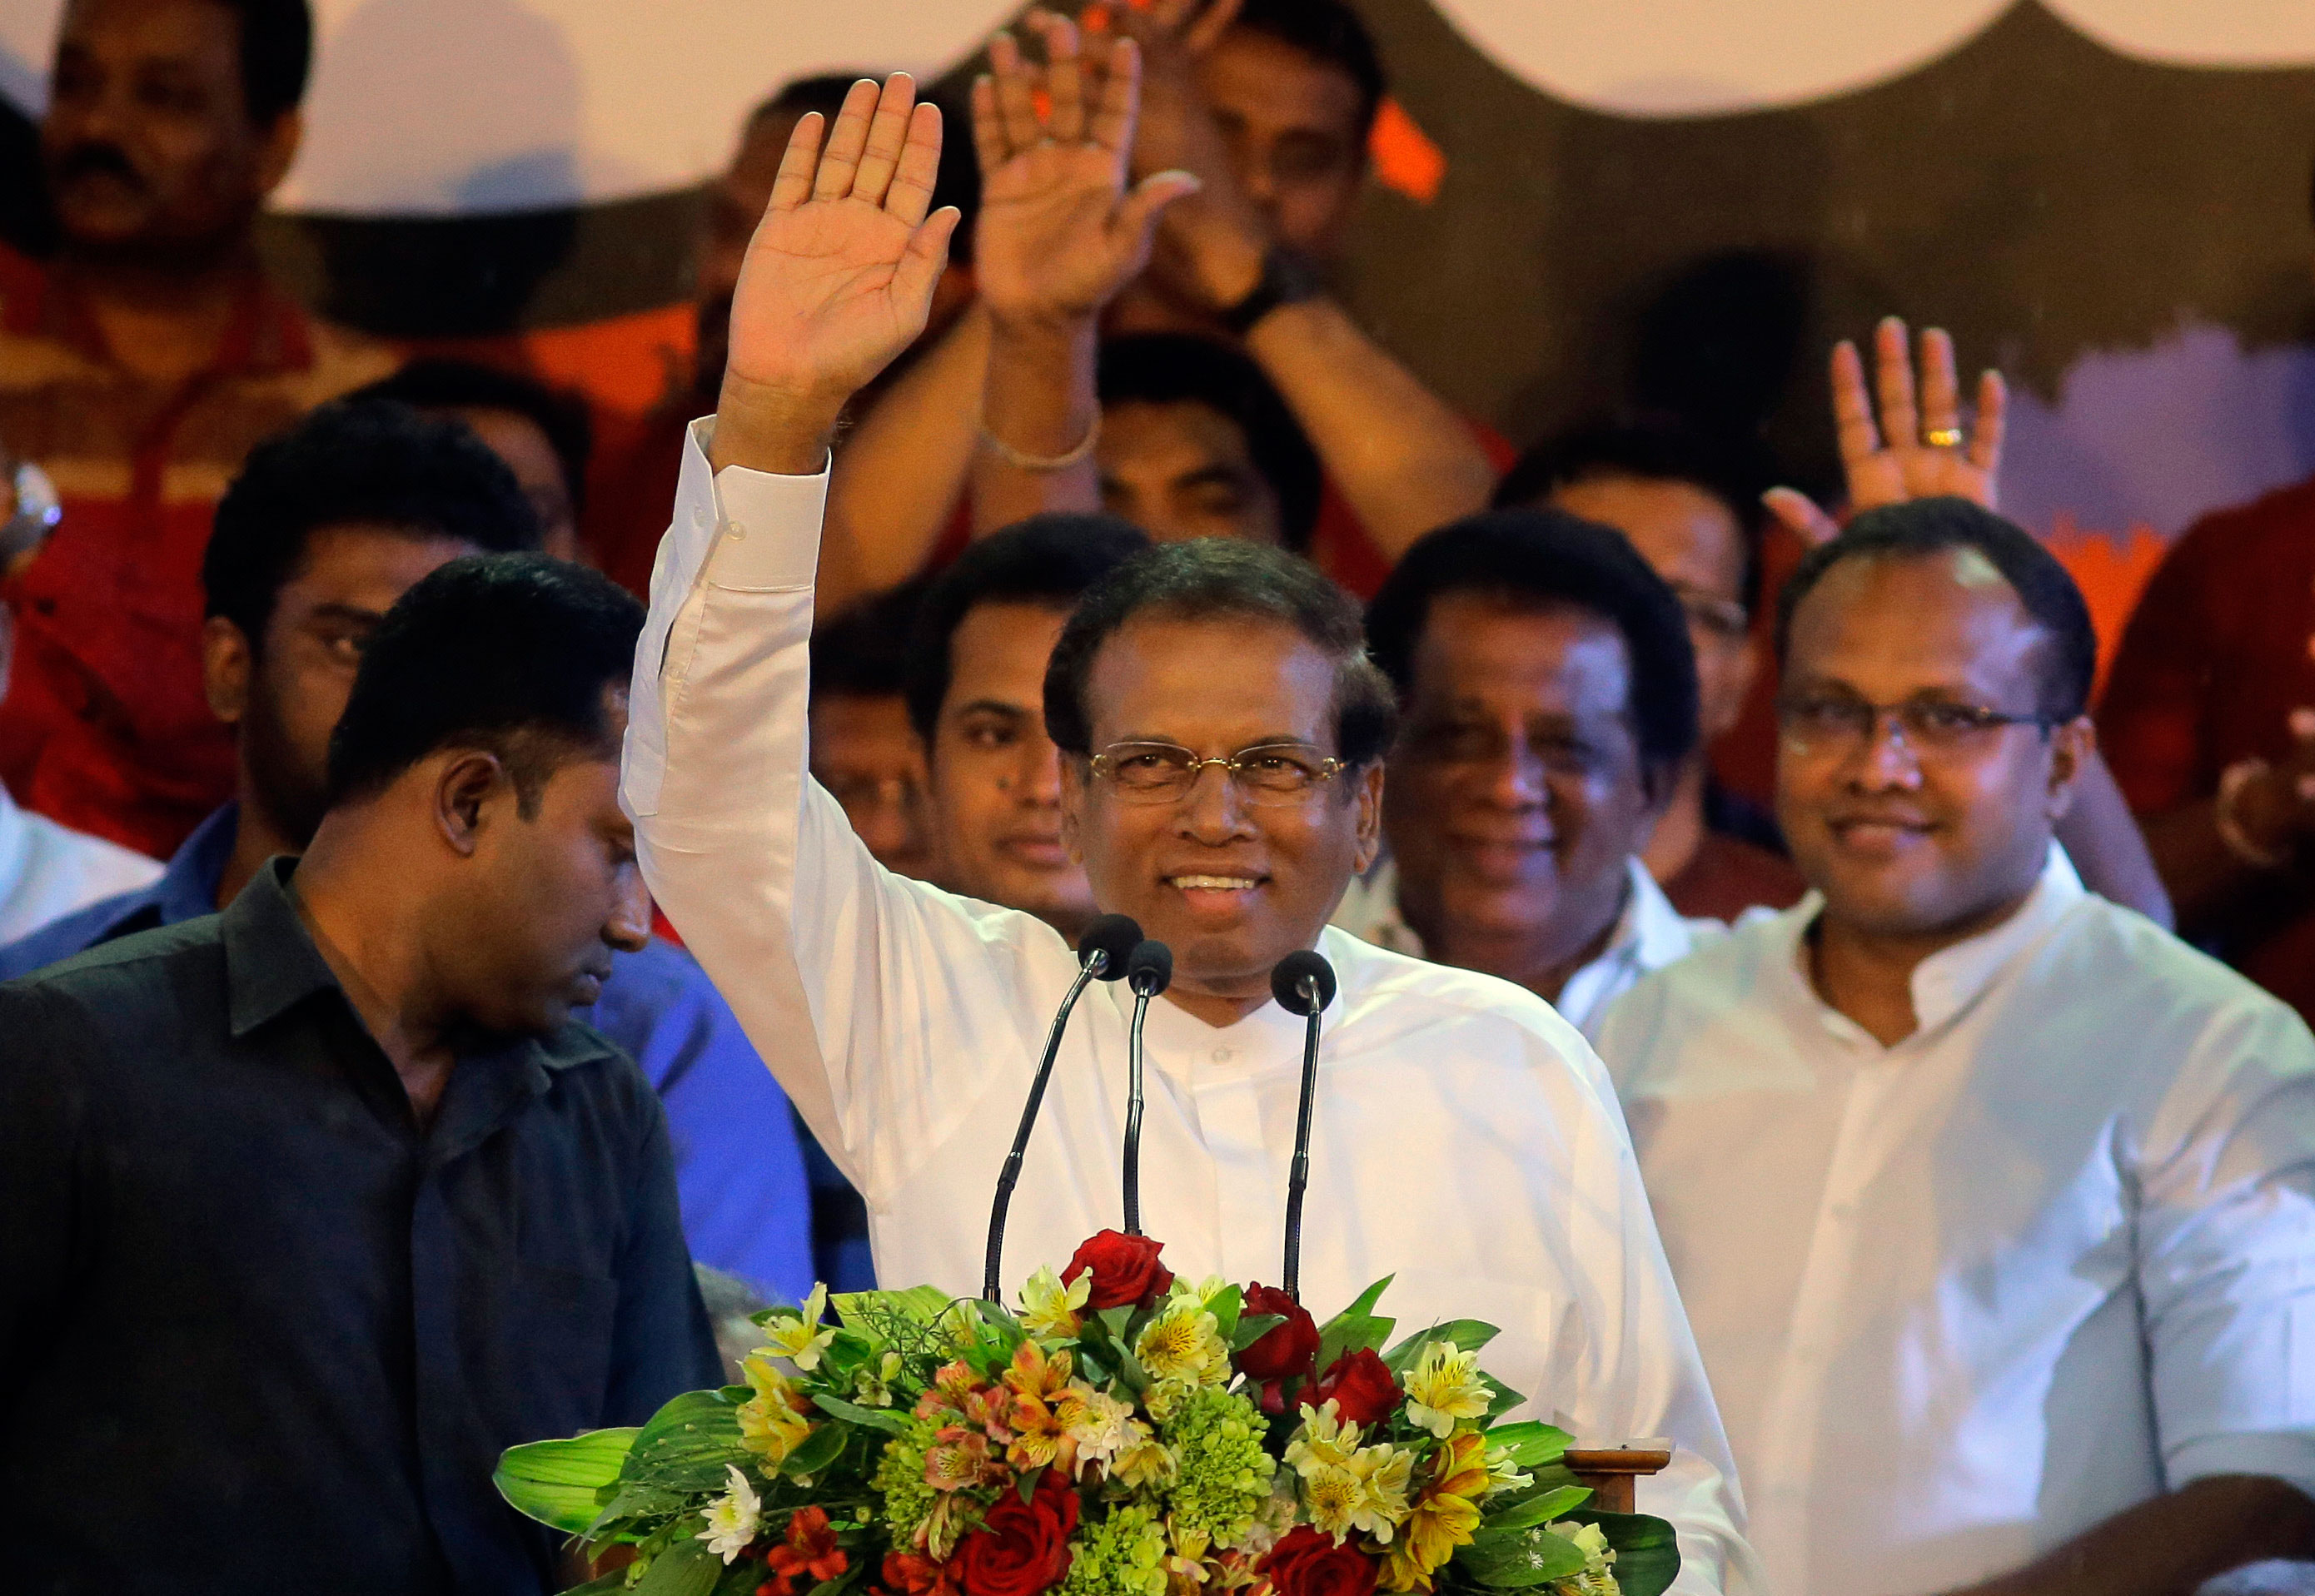 It is only an interim relief for the convicts, as Maithripala Sirisena, who is likely to fight a re-election in December, looks adamant upon imposing the death penalty.